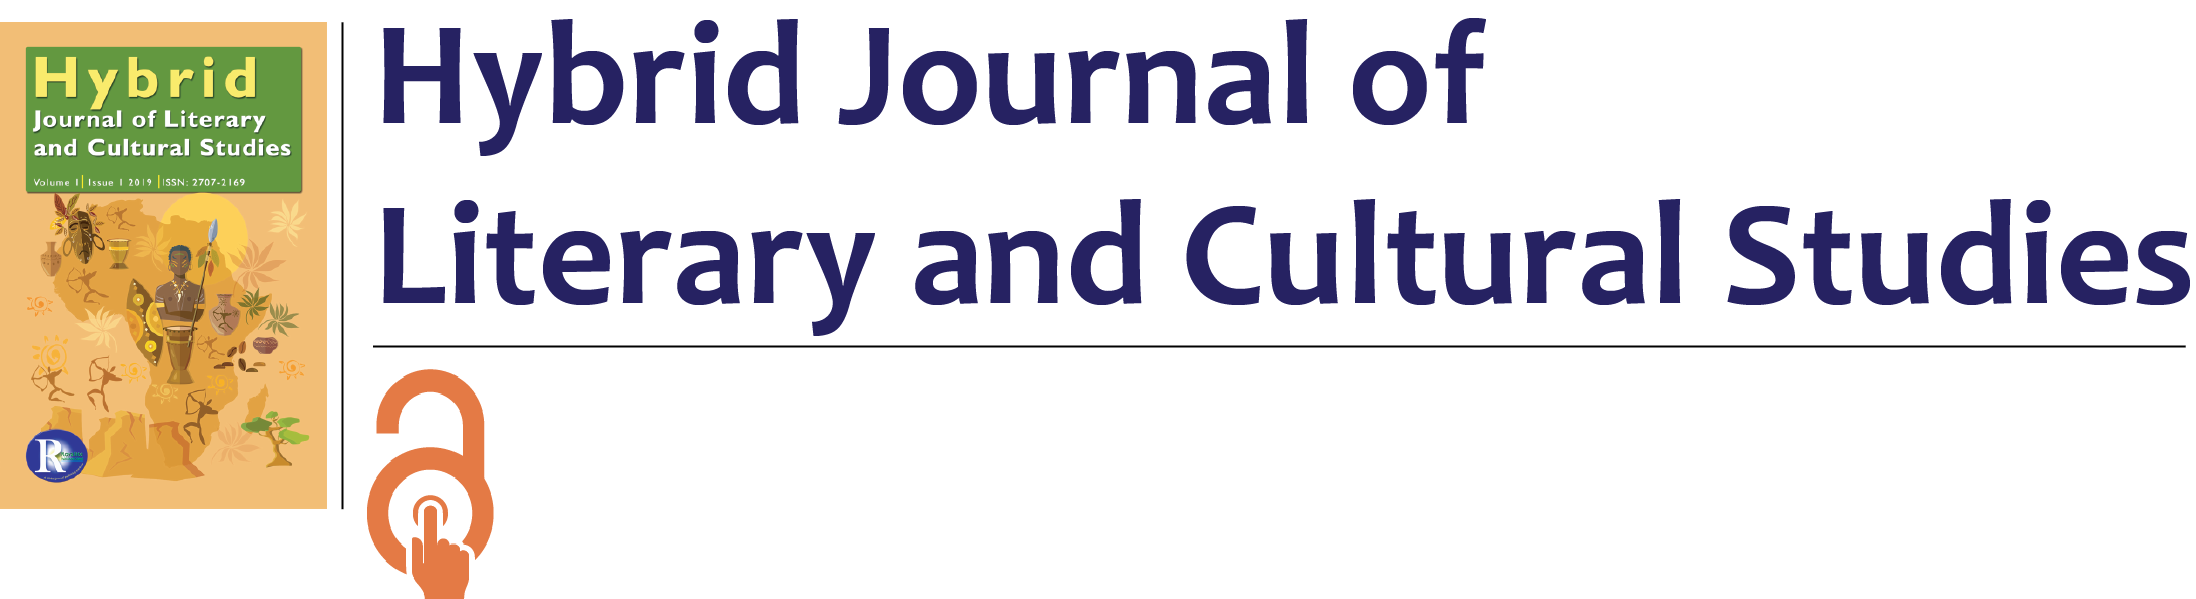 Hybrid Journal of Literary and Cultural Studies